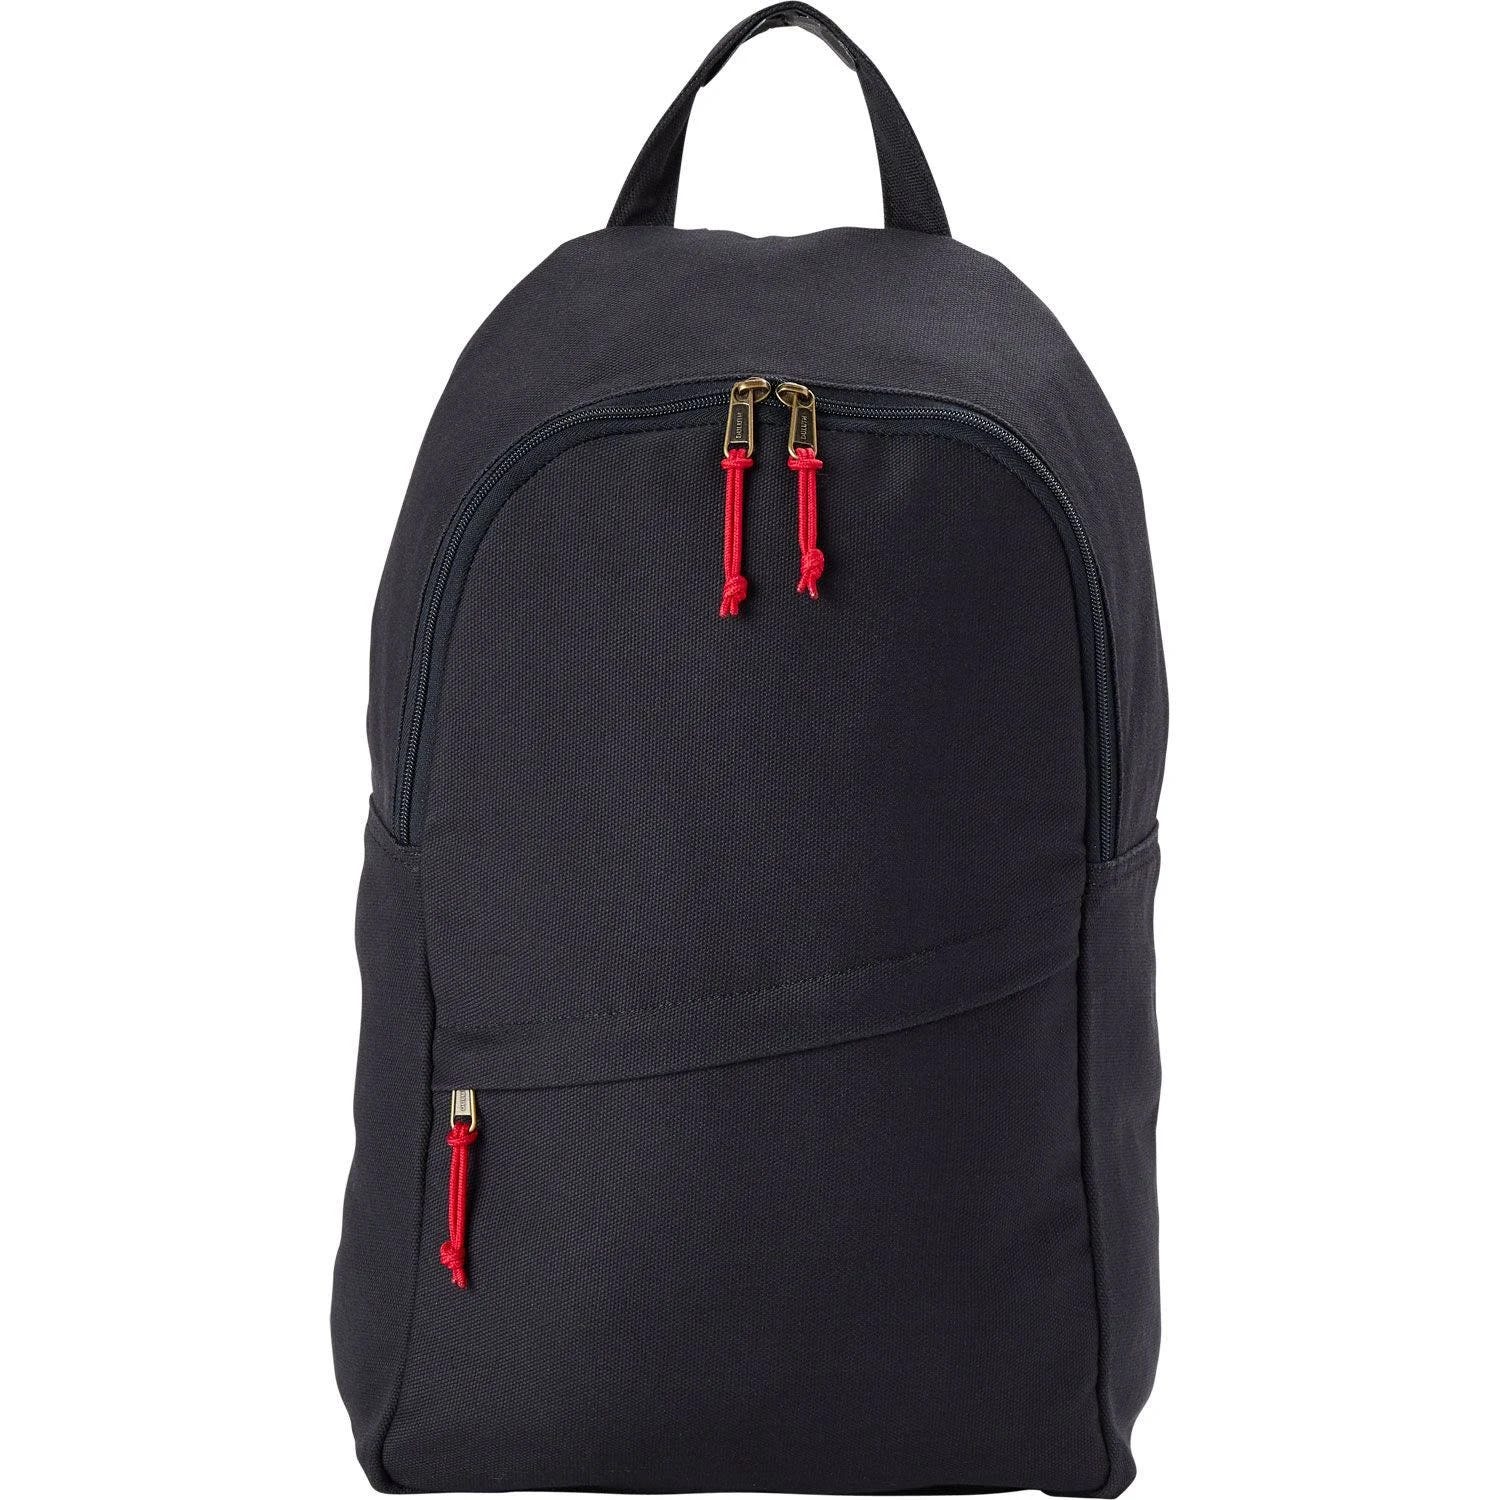 Durable Canvas Backpack for Everyday Use | Image